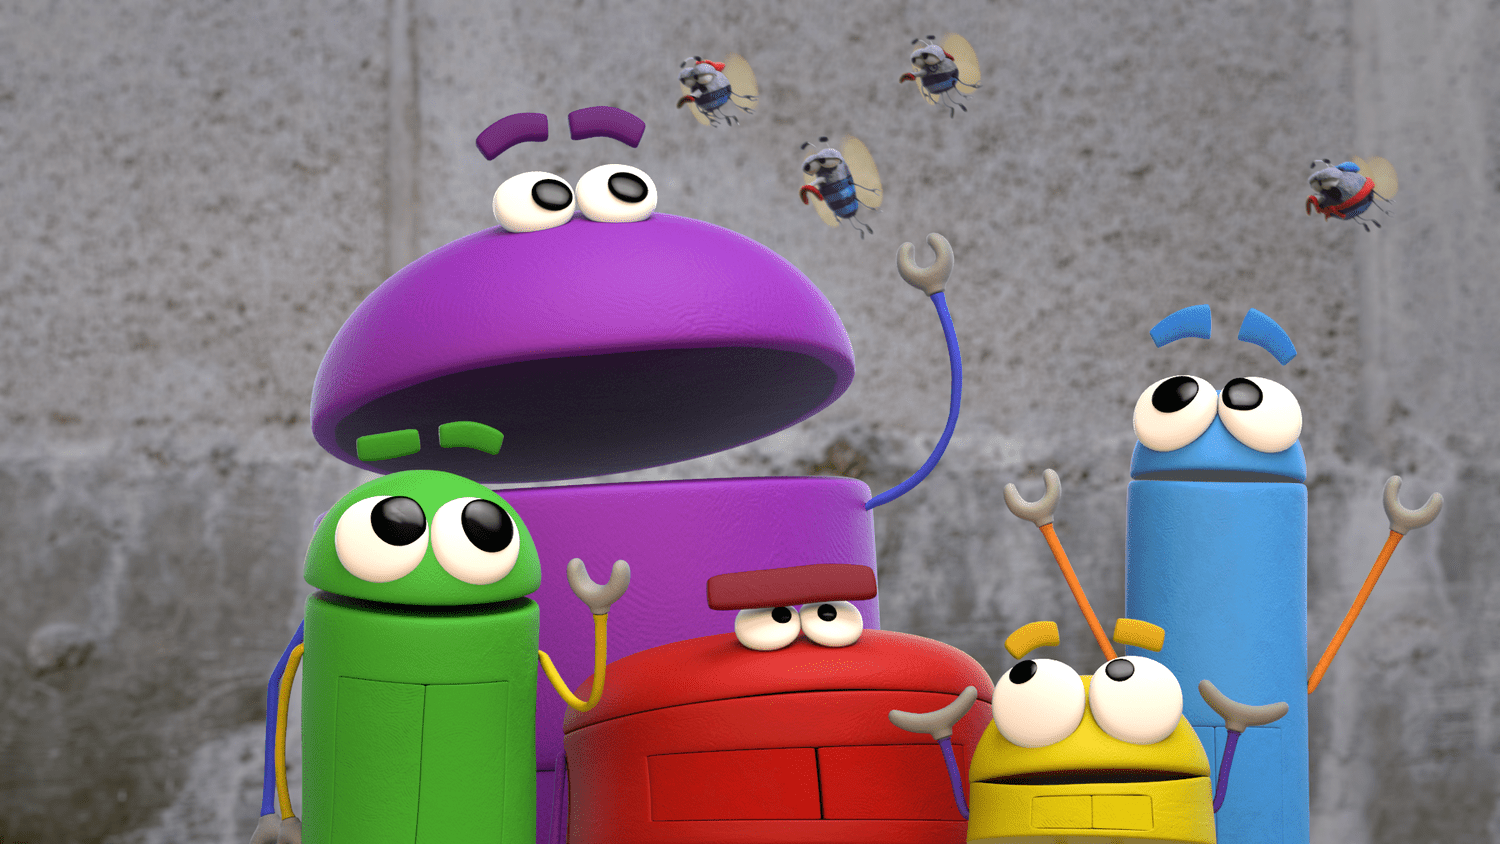 An image of the show Ask the StoryBots.